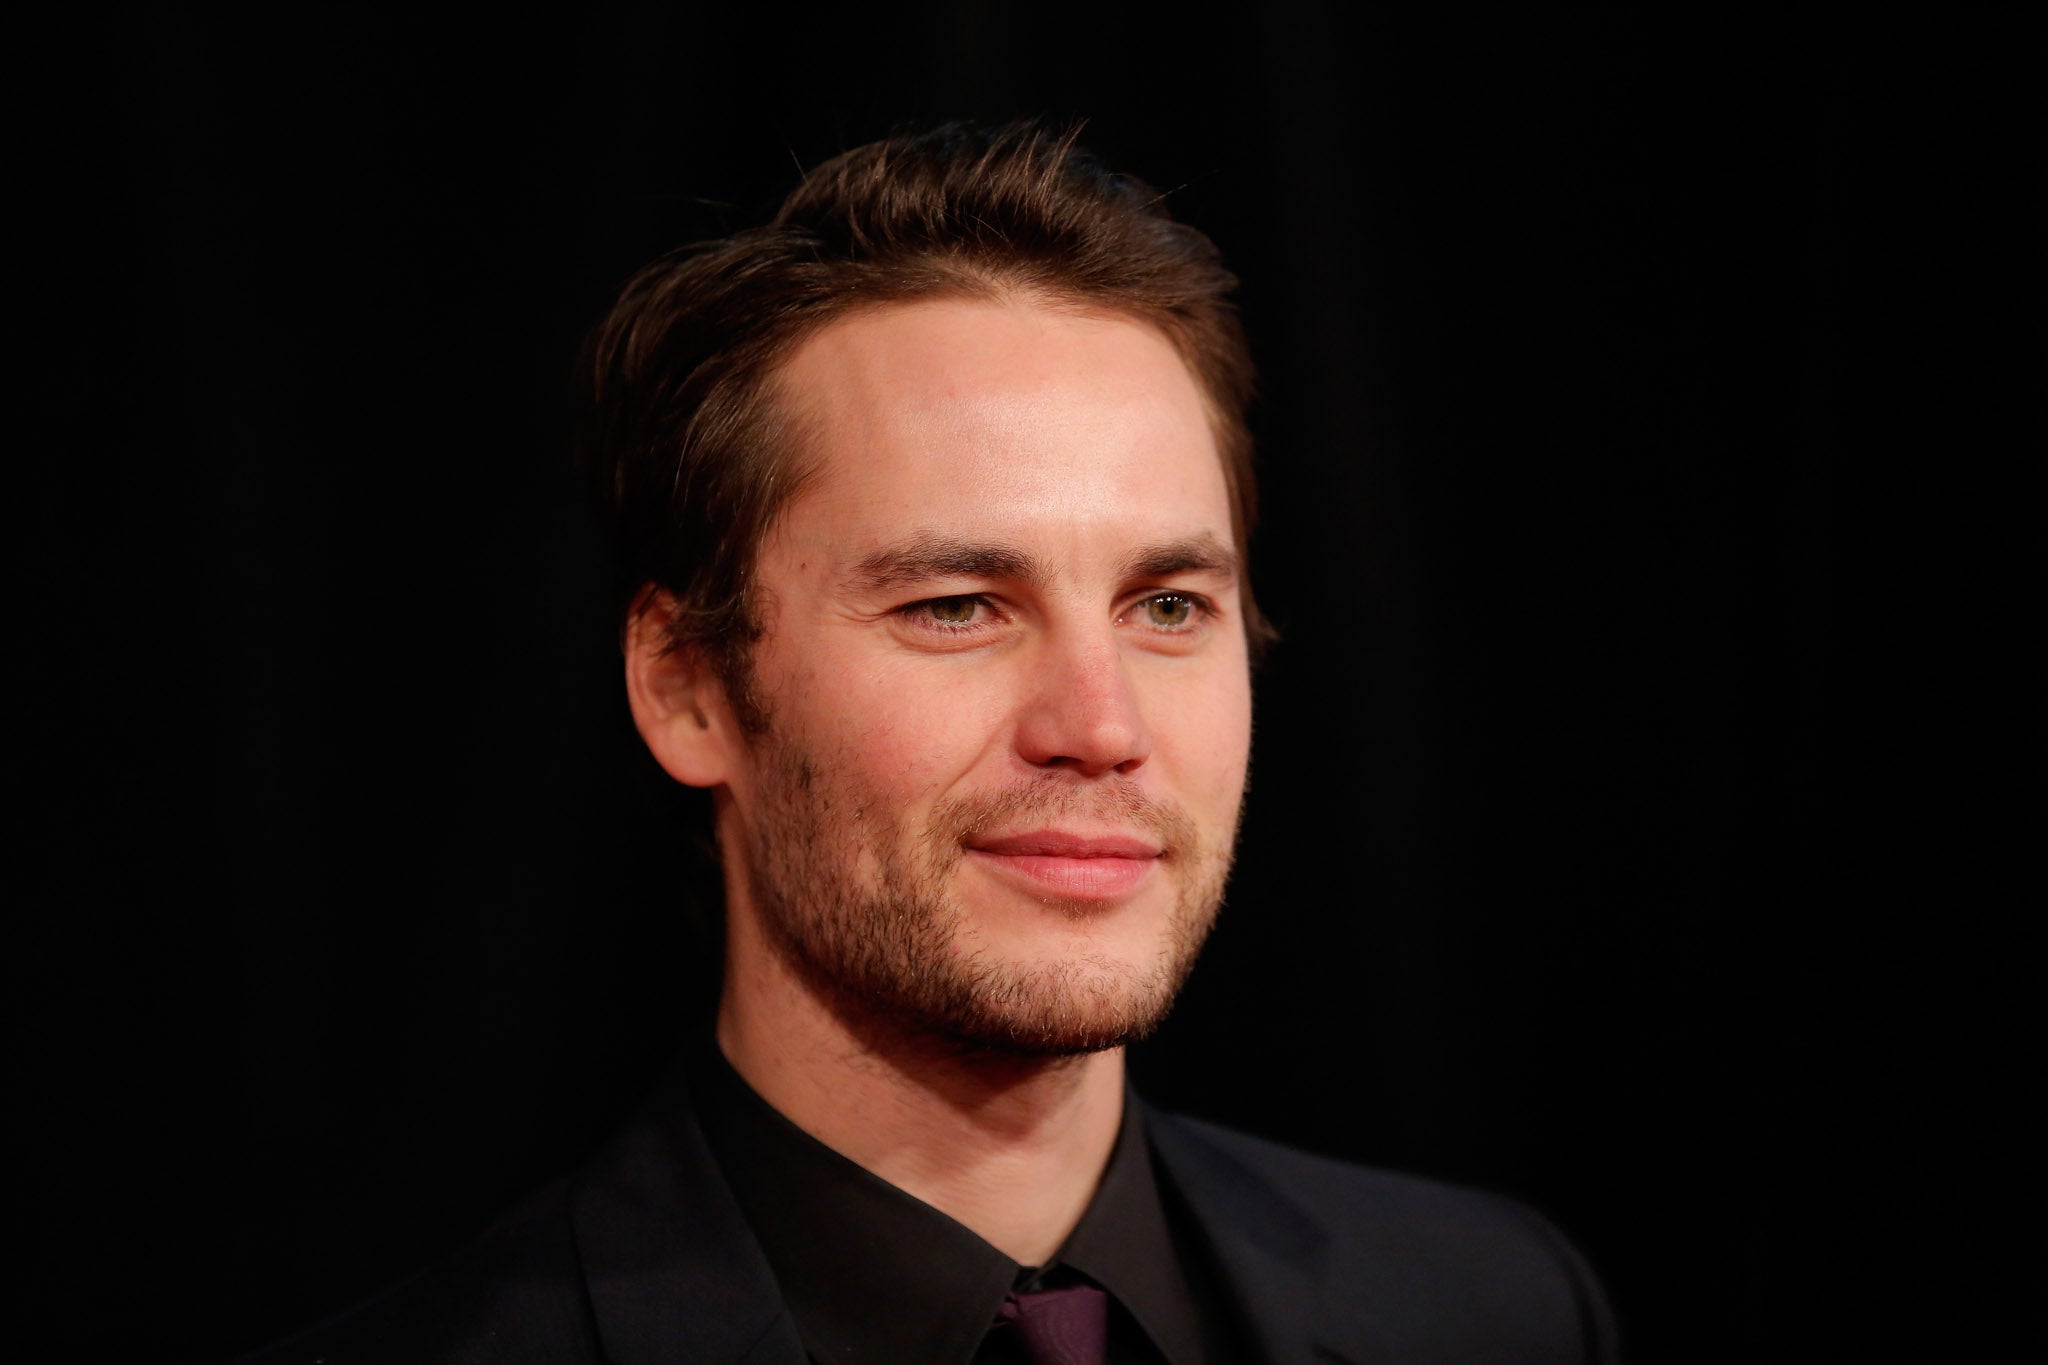 Taylor Kitsch will star in the second series of True Detective